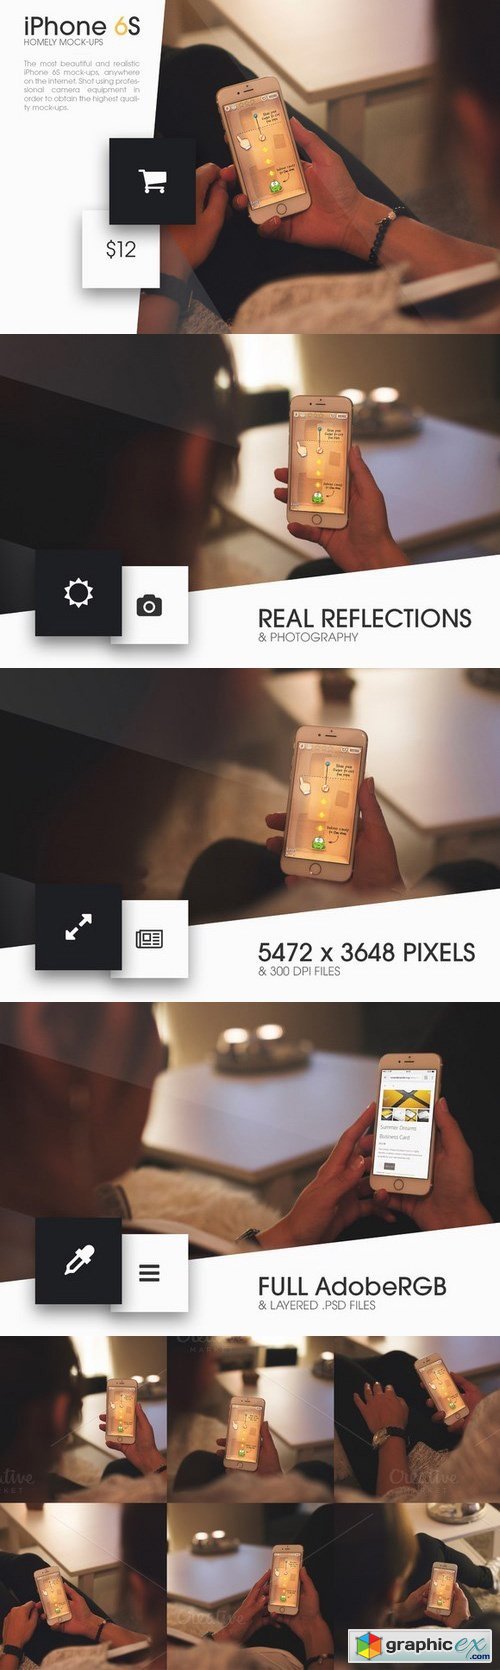 iPhone 6S Homely Mock-Ups